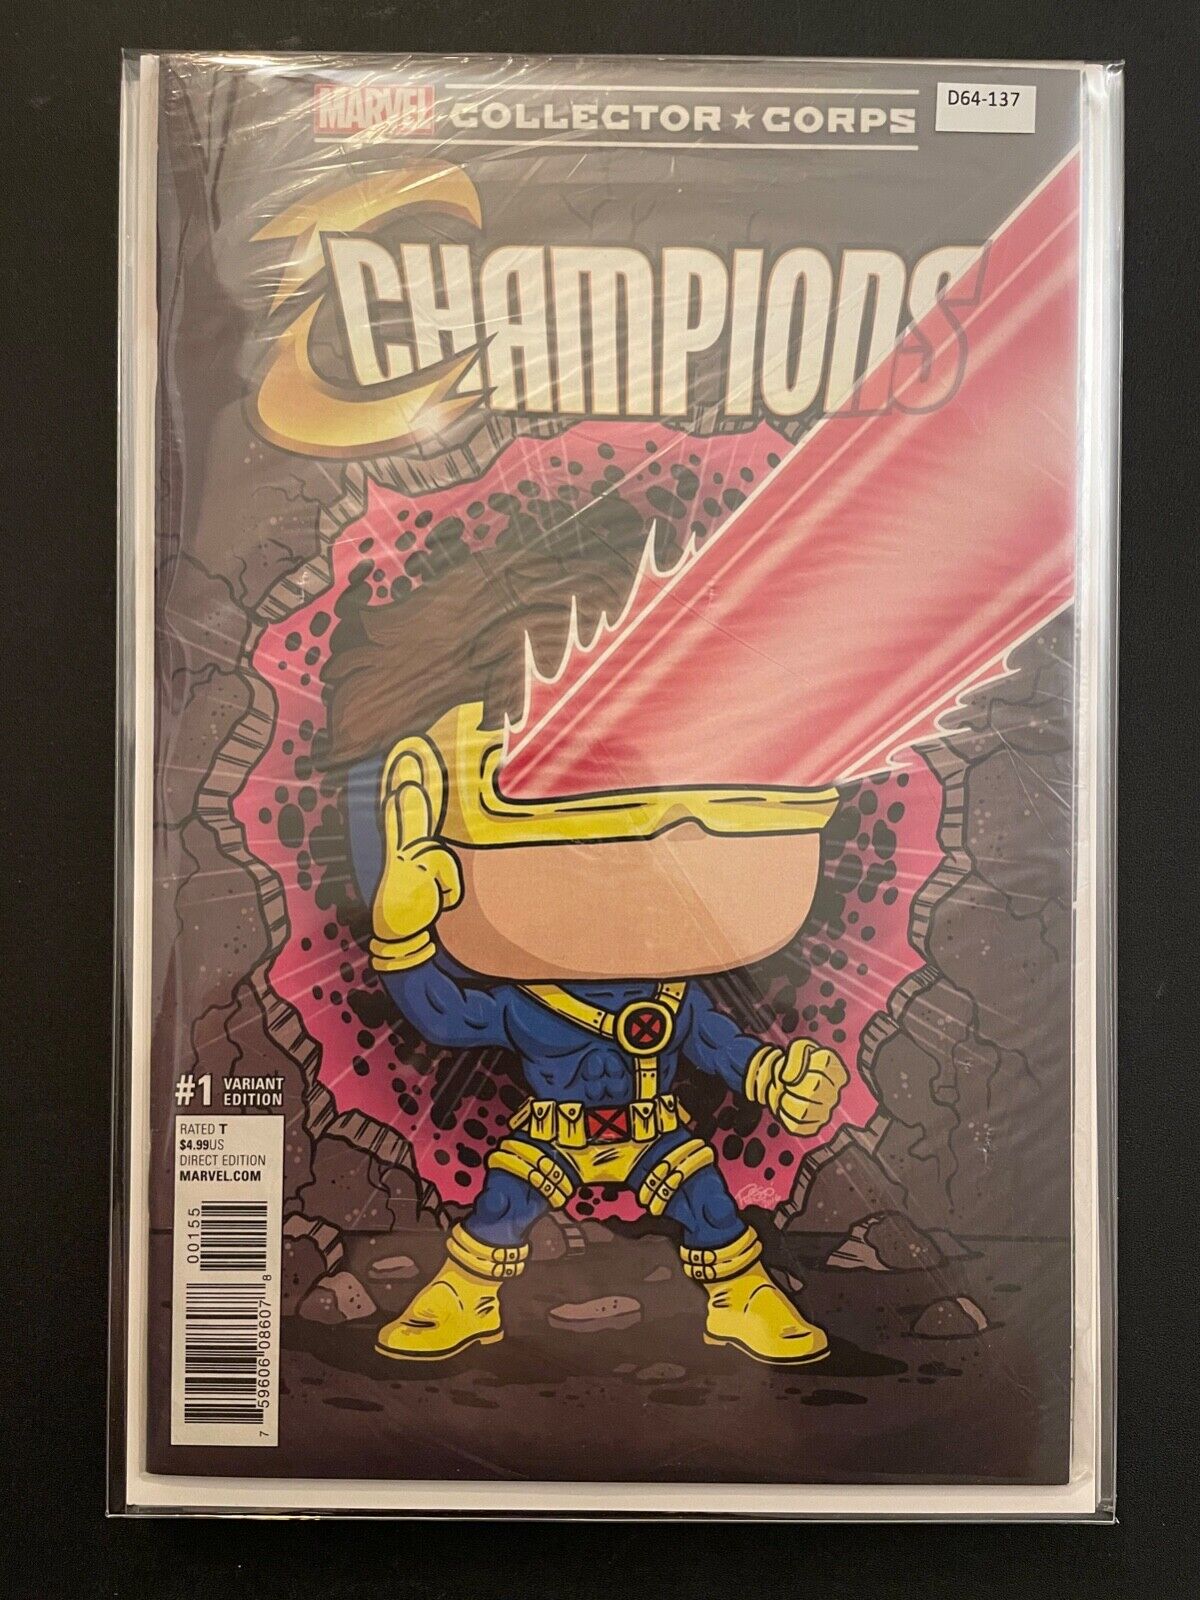 Champions 1 Vol 2 Sealed Poly bag Marvel Collector Corp High Grade 9.6 D64-137